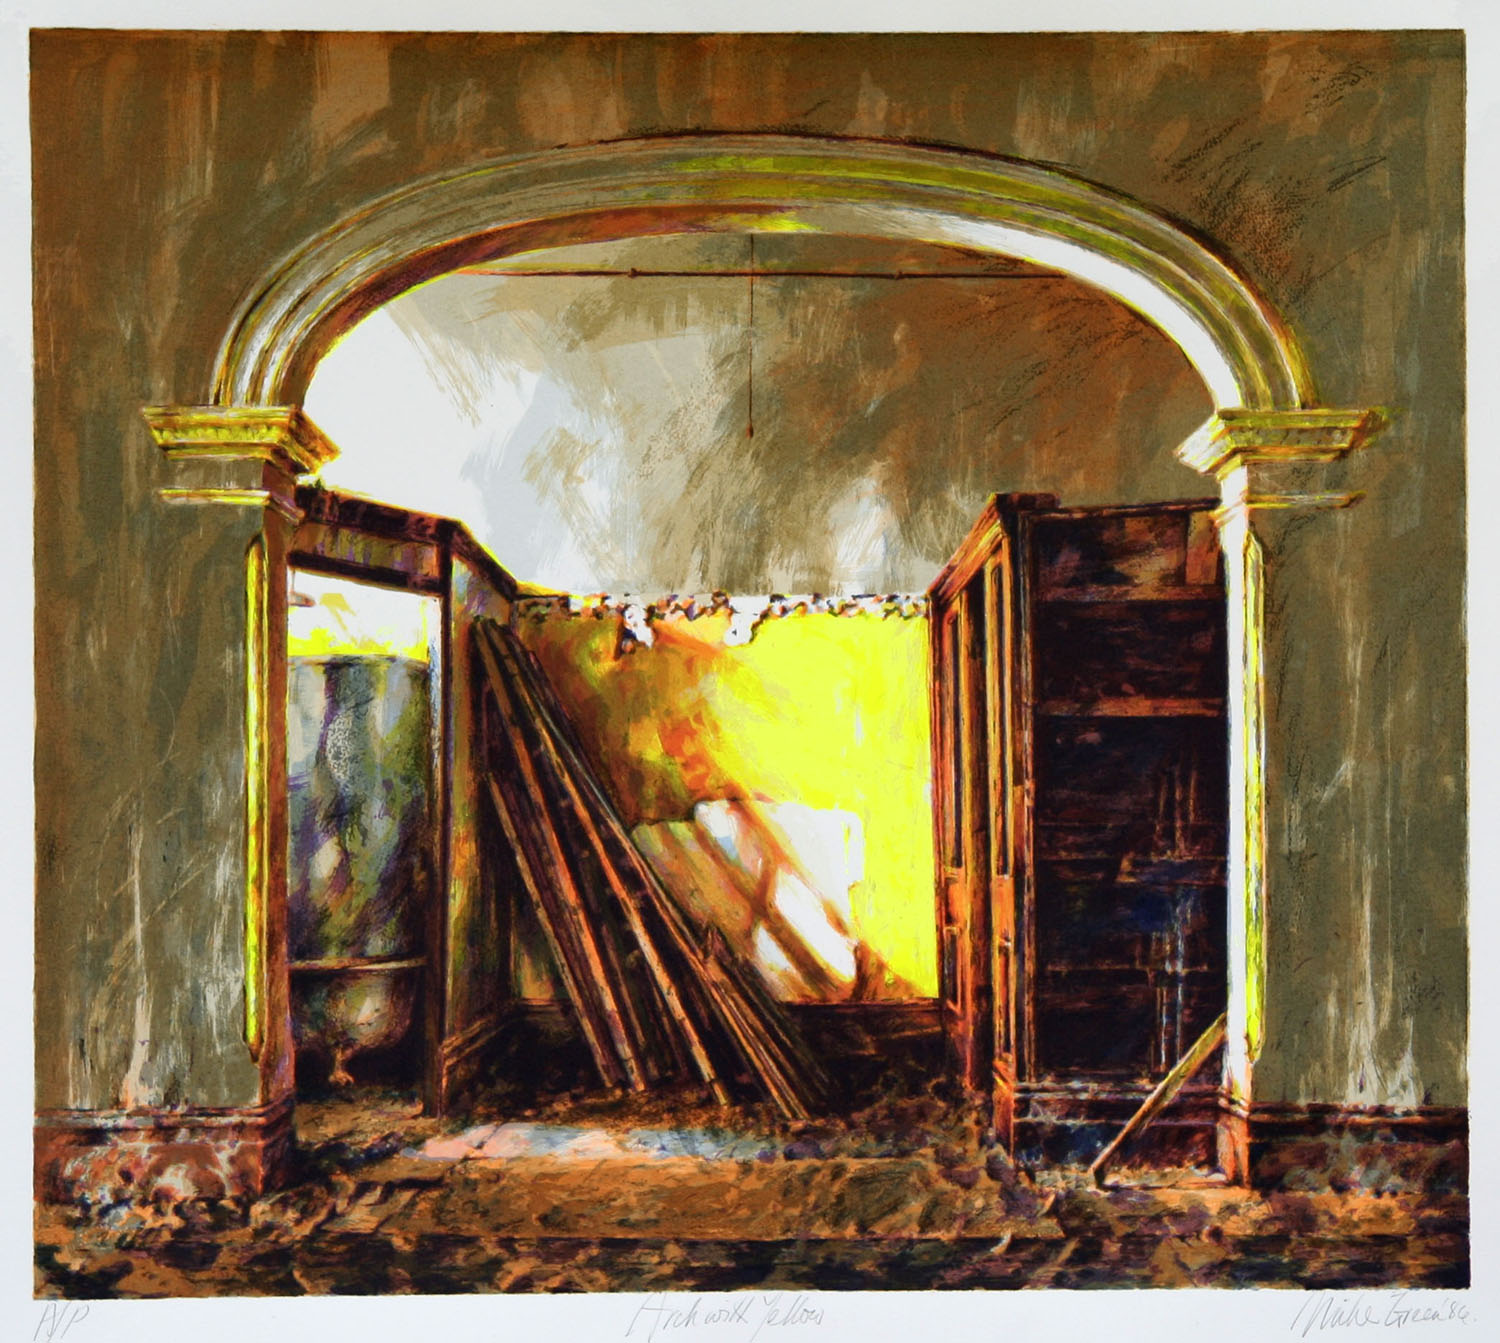 "Arch with yellow"